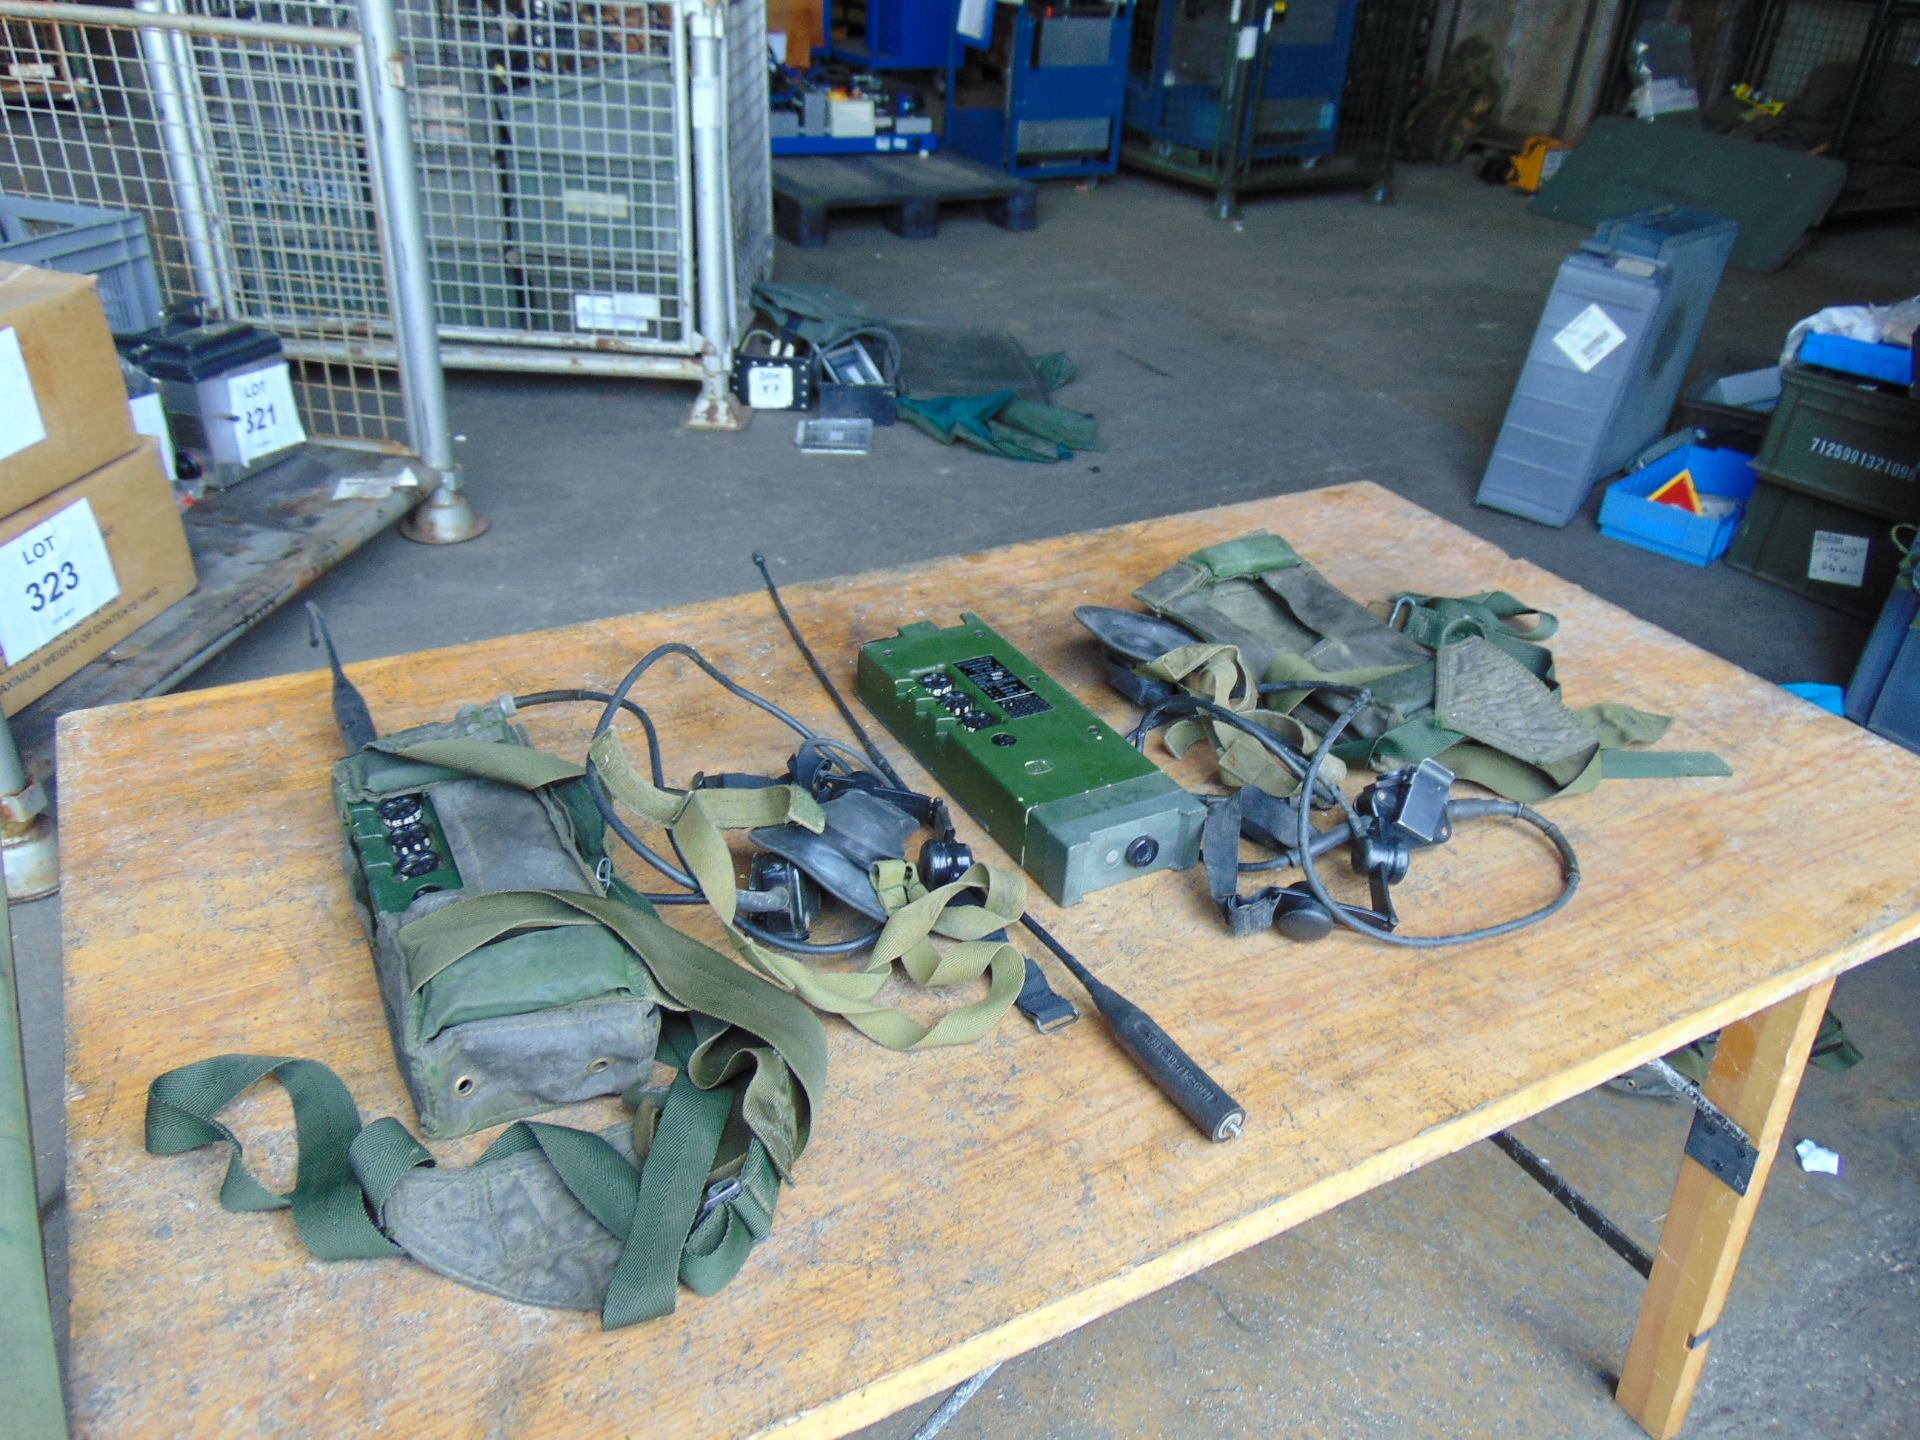 2 x RT 349 British Army Transmitter / Receiver c/w Pouch, Headset, Antenna and Battery Cassette. - Image 3 of 5